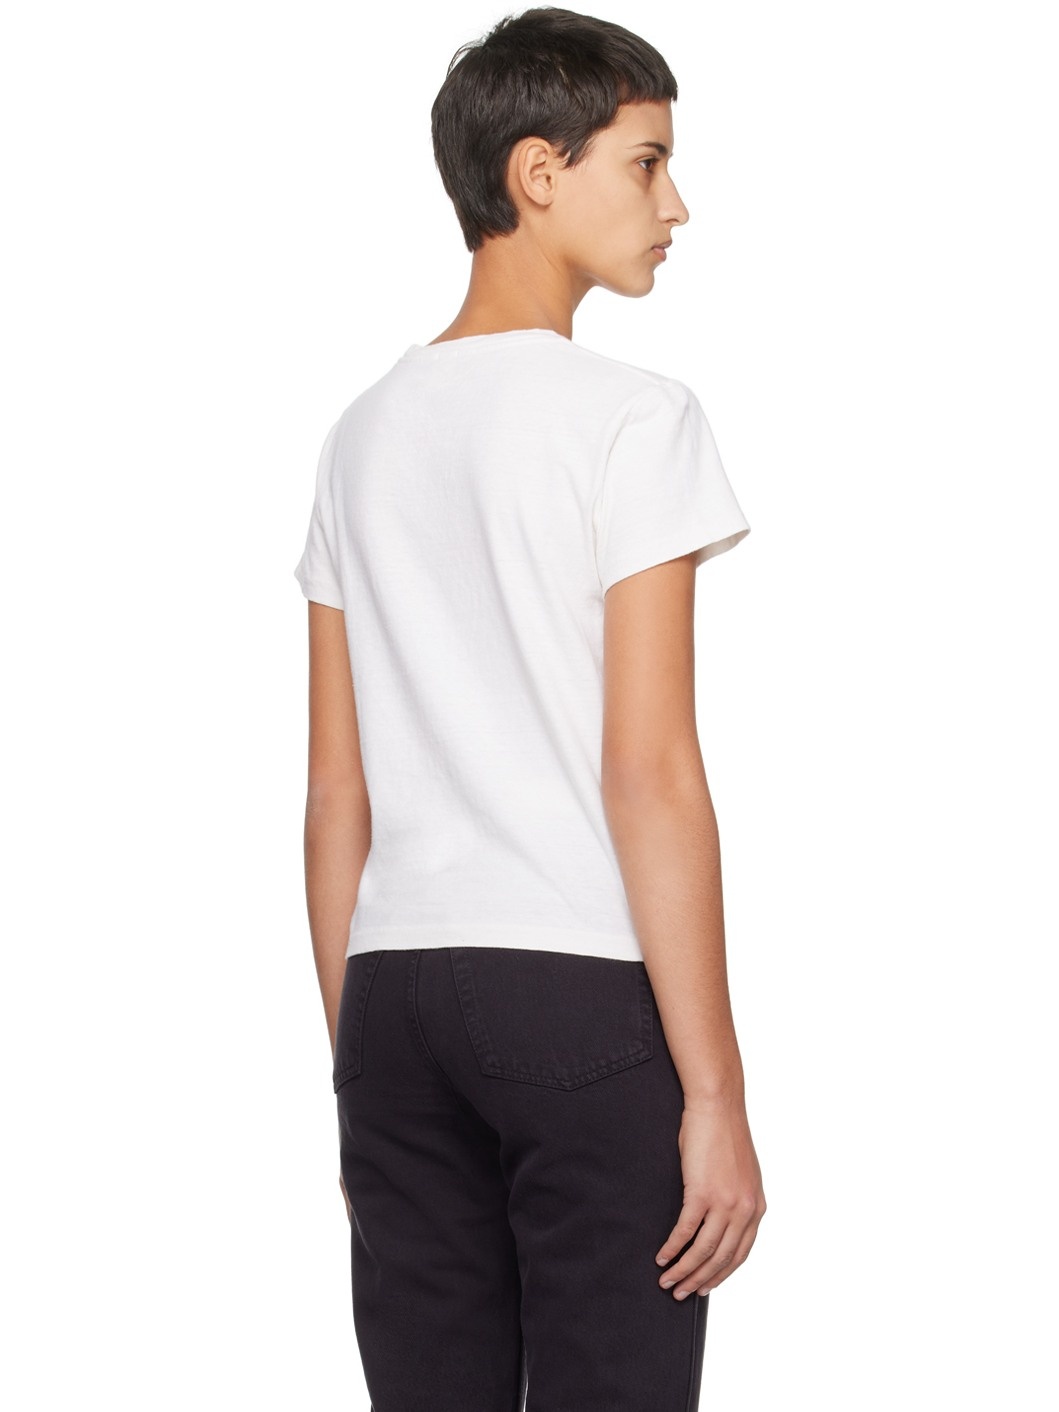 Off-White Hanes Edition Classic T-Shirt - 3